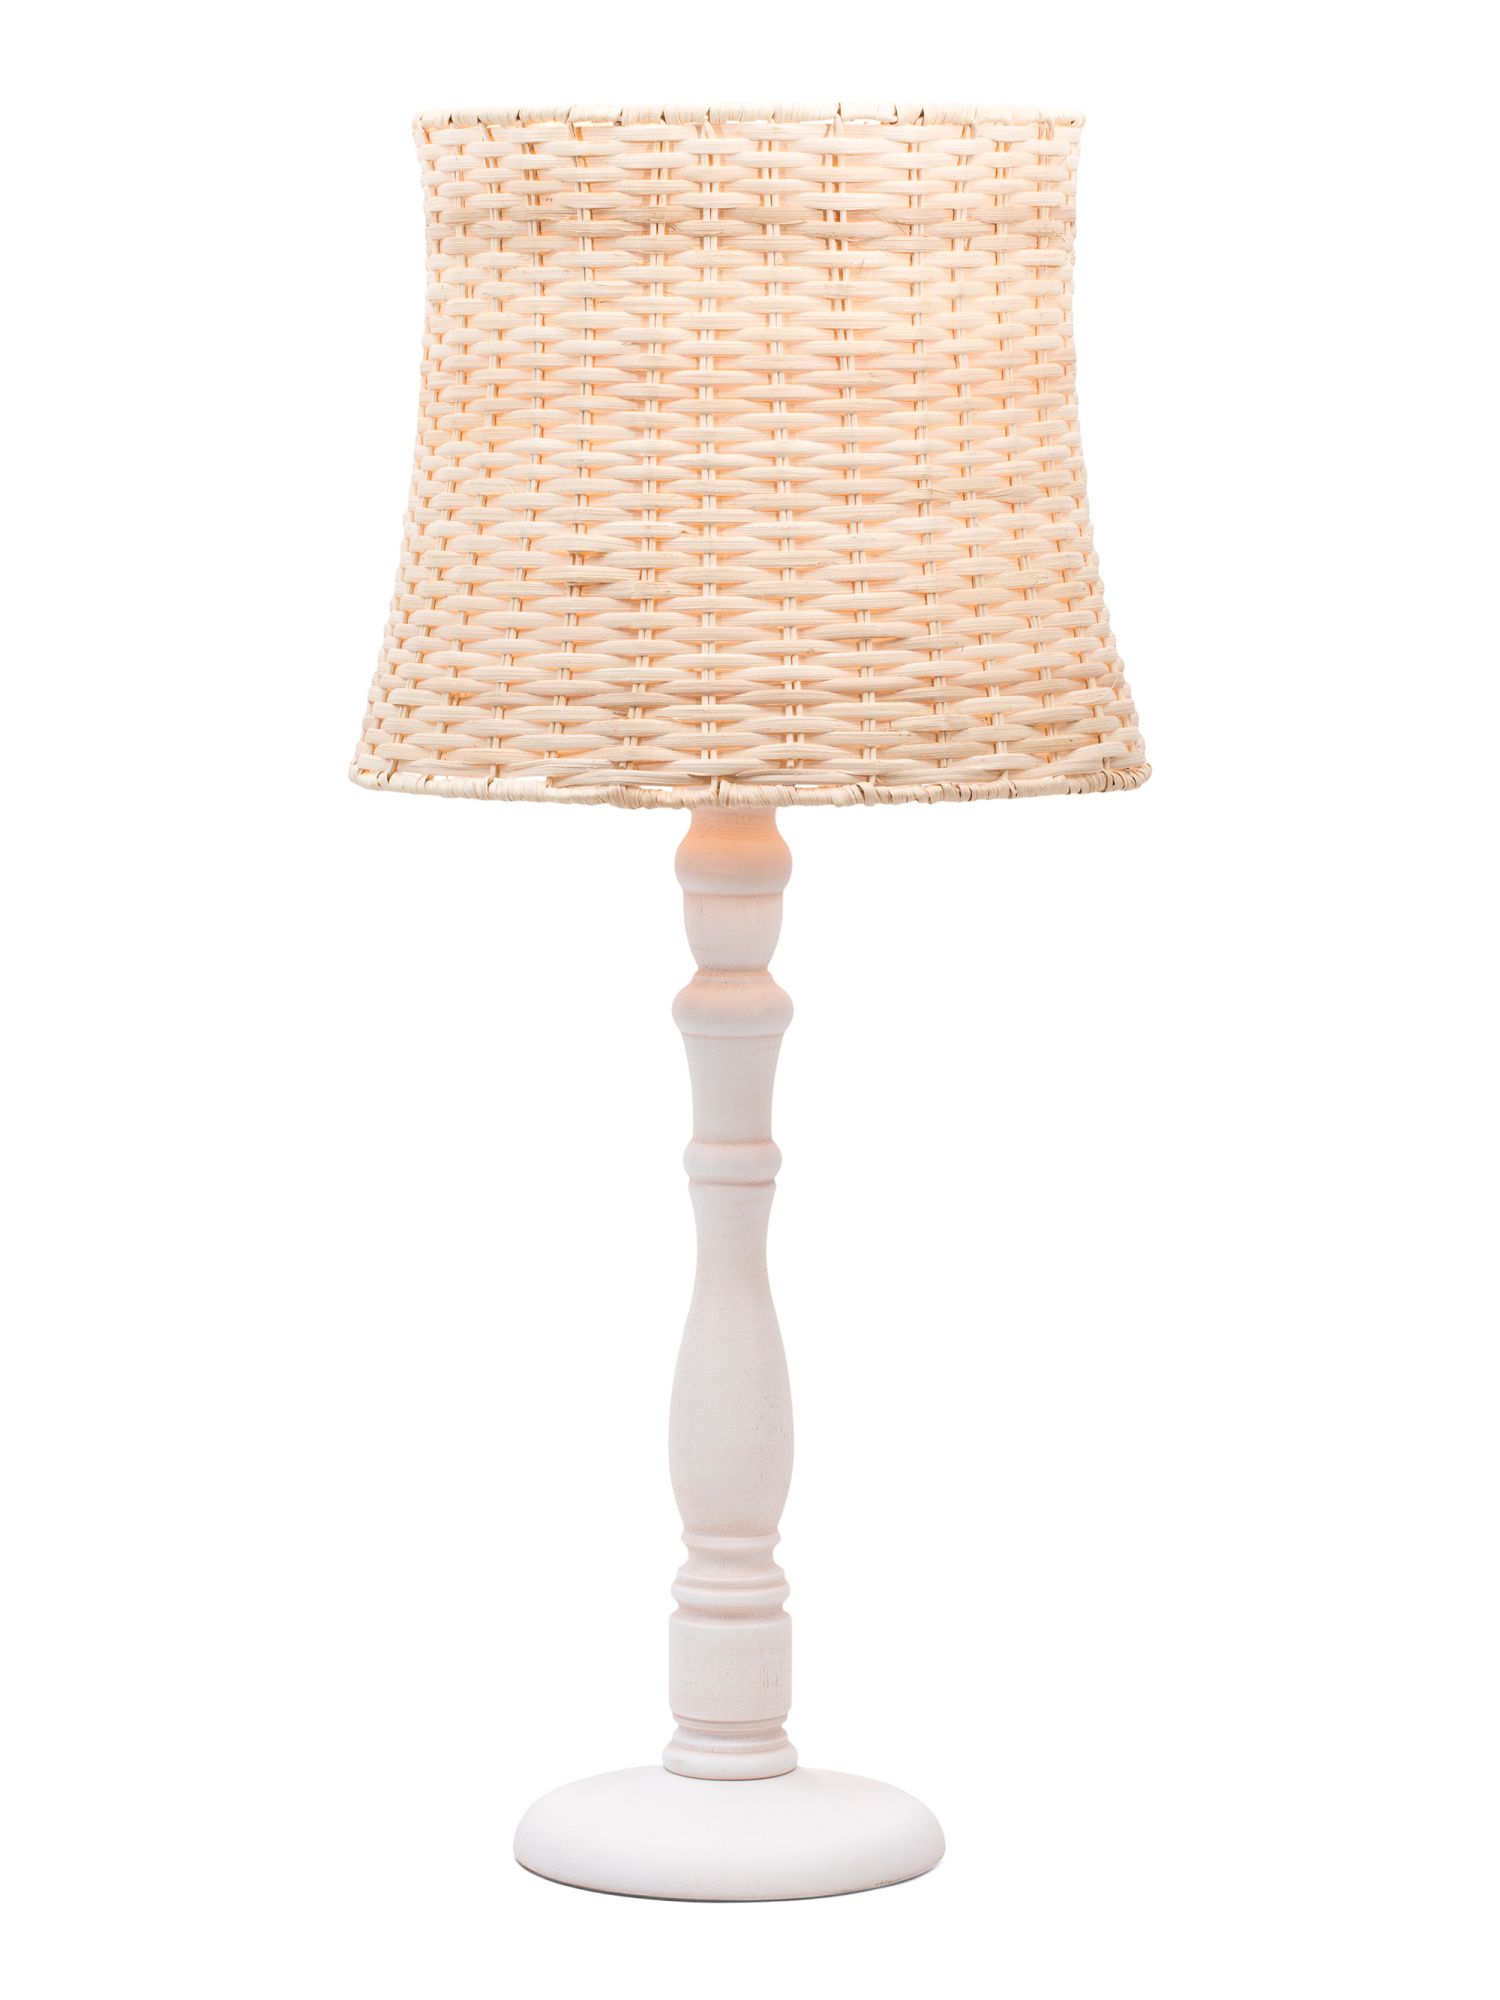 Table Lamp With Woven Shade | TJ Maxx